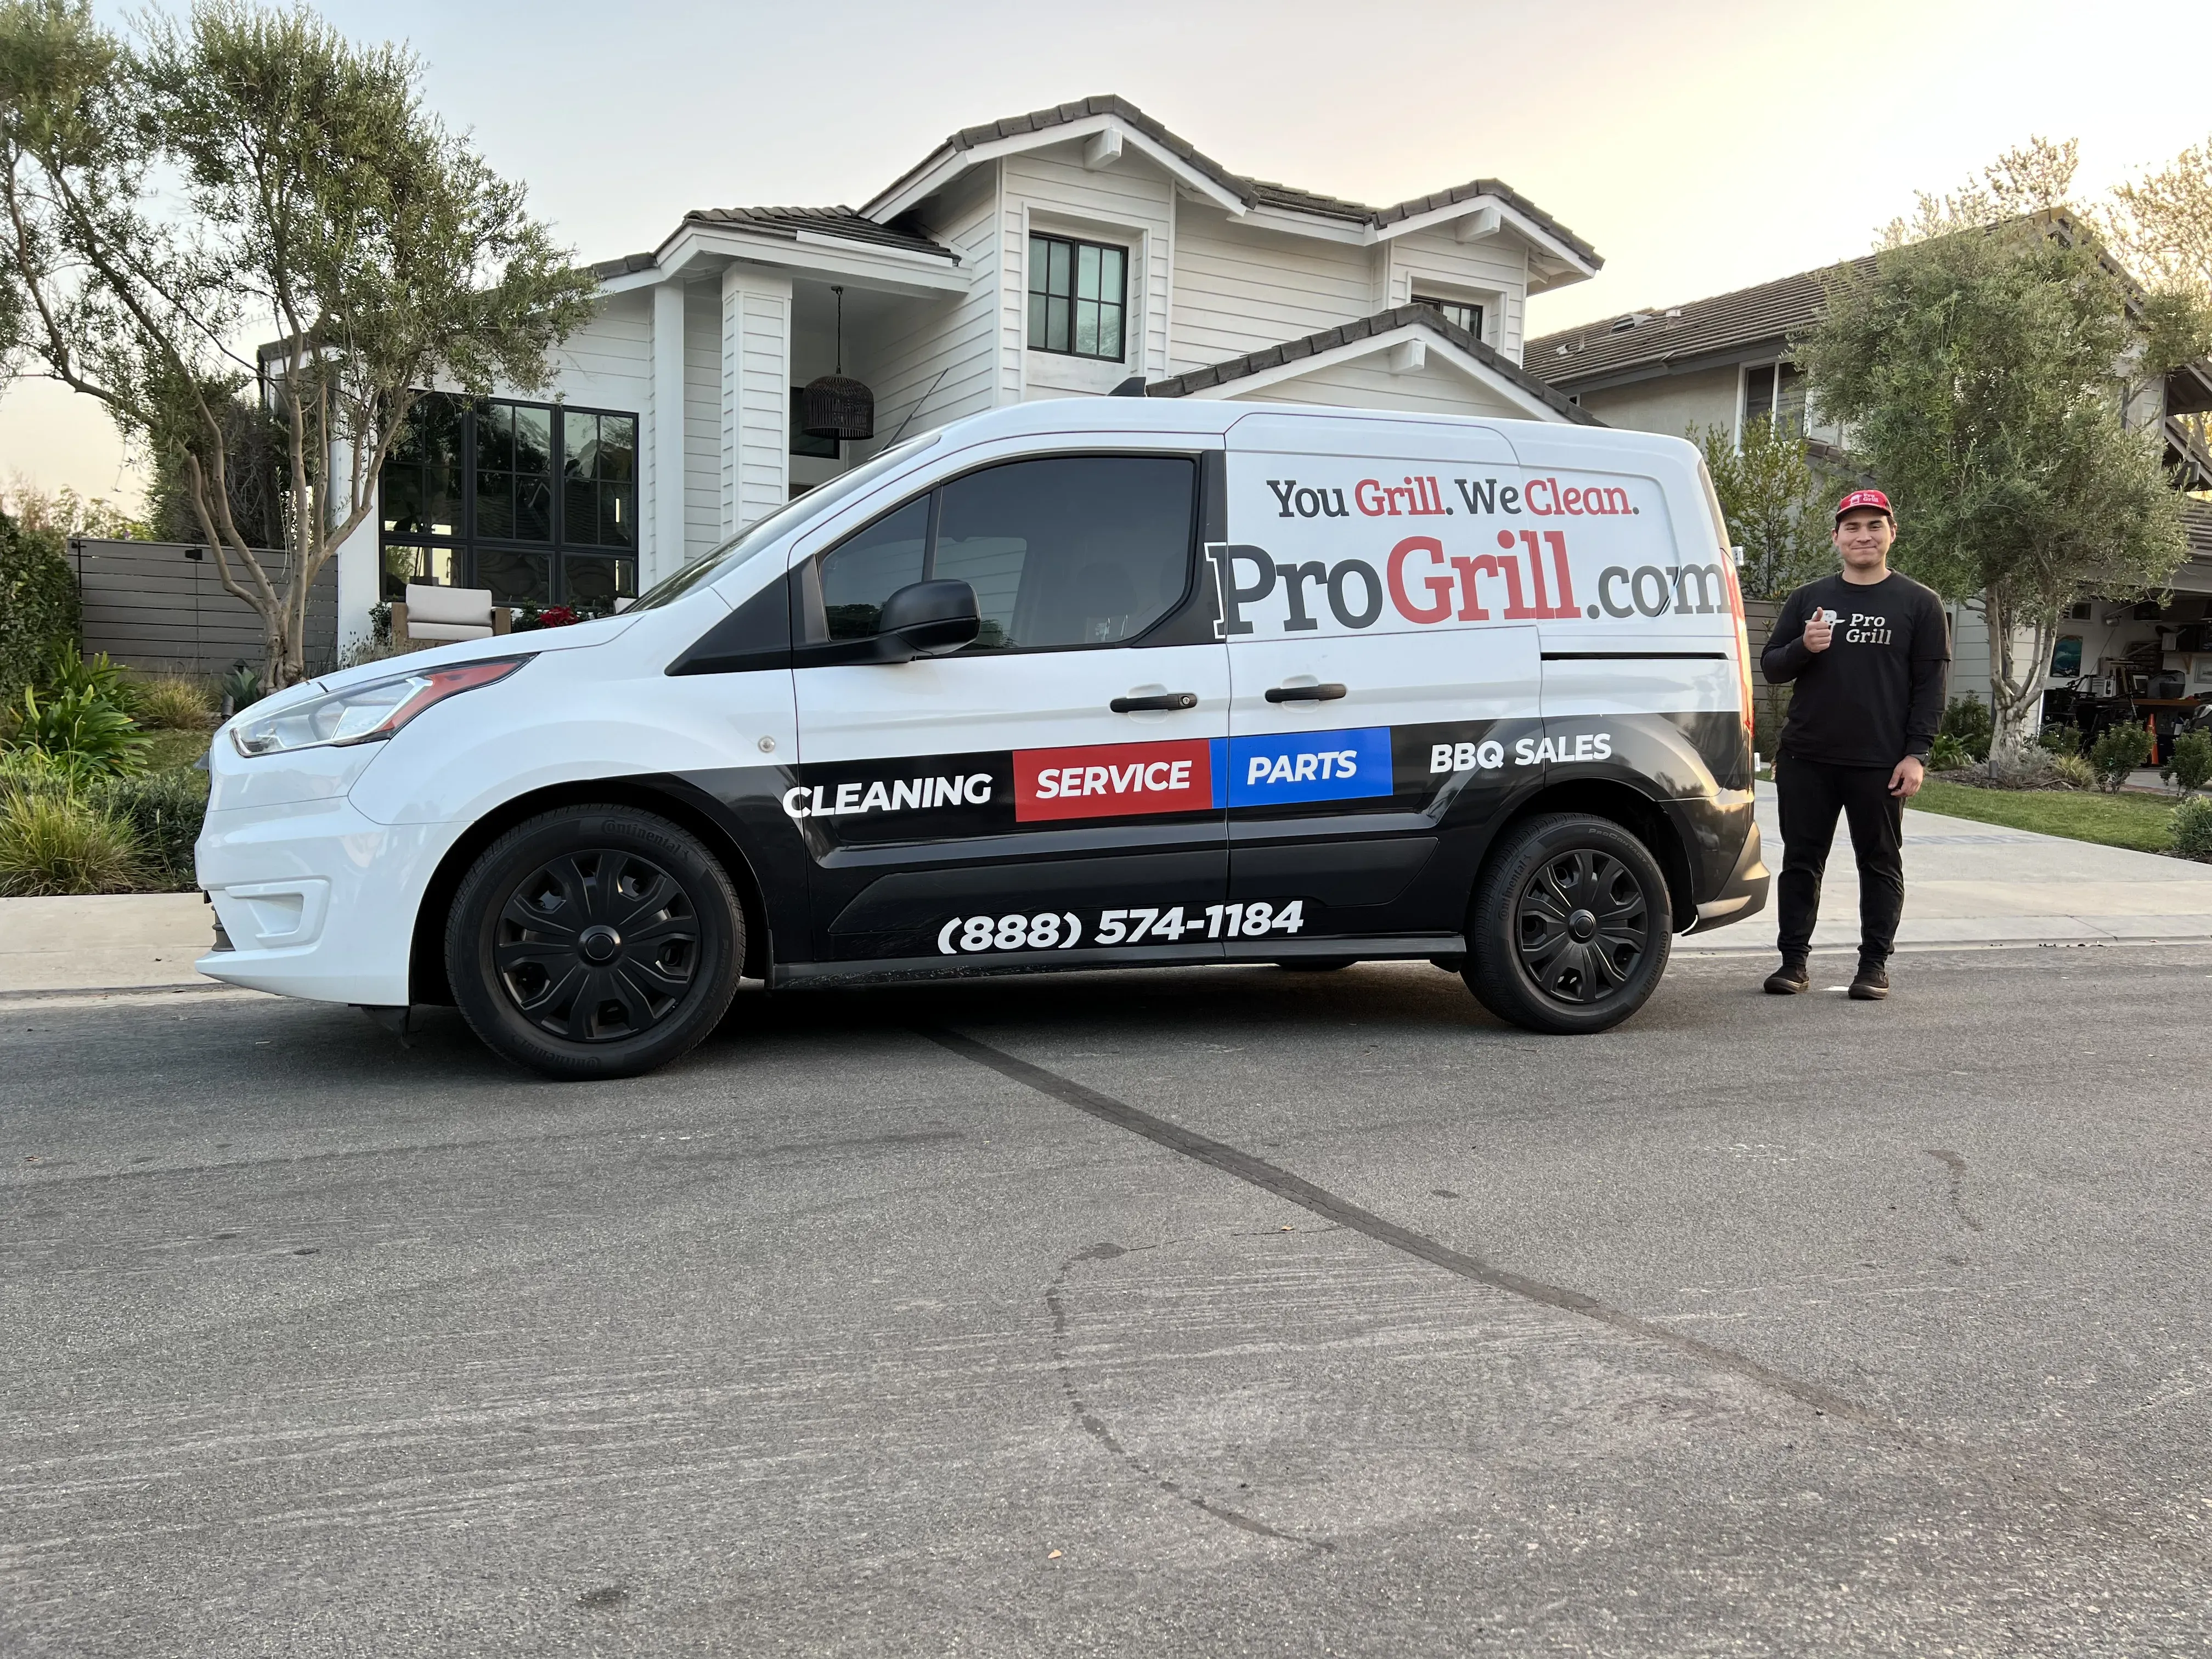 Pro Grill team member next to their van at a home in Orange County.